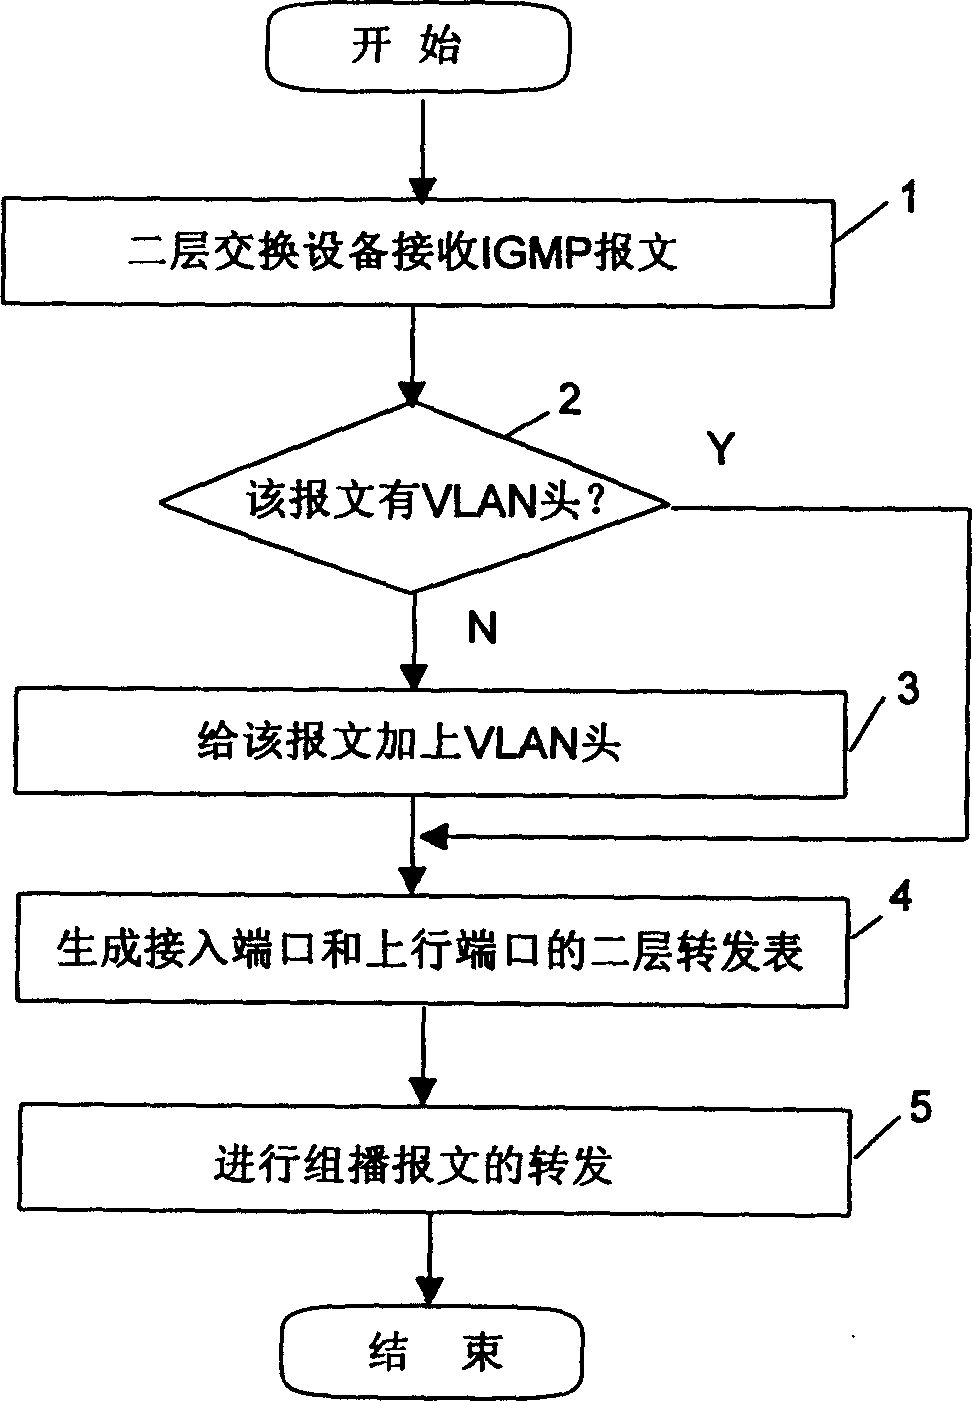 Multicasting messag transmission method base on two layer exchange device